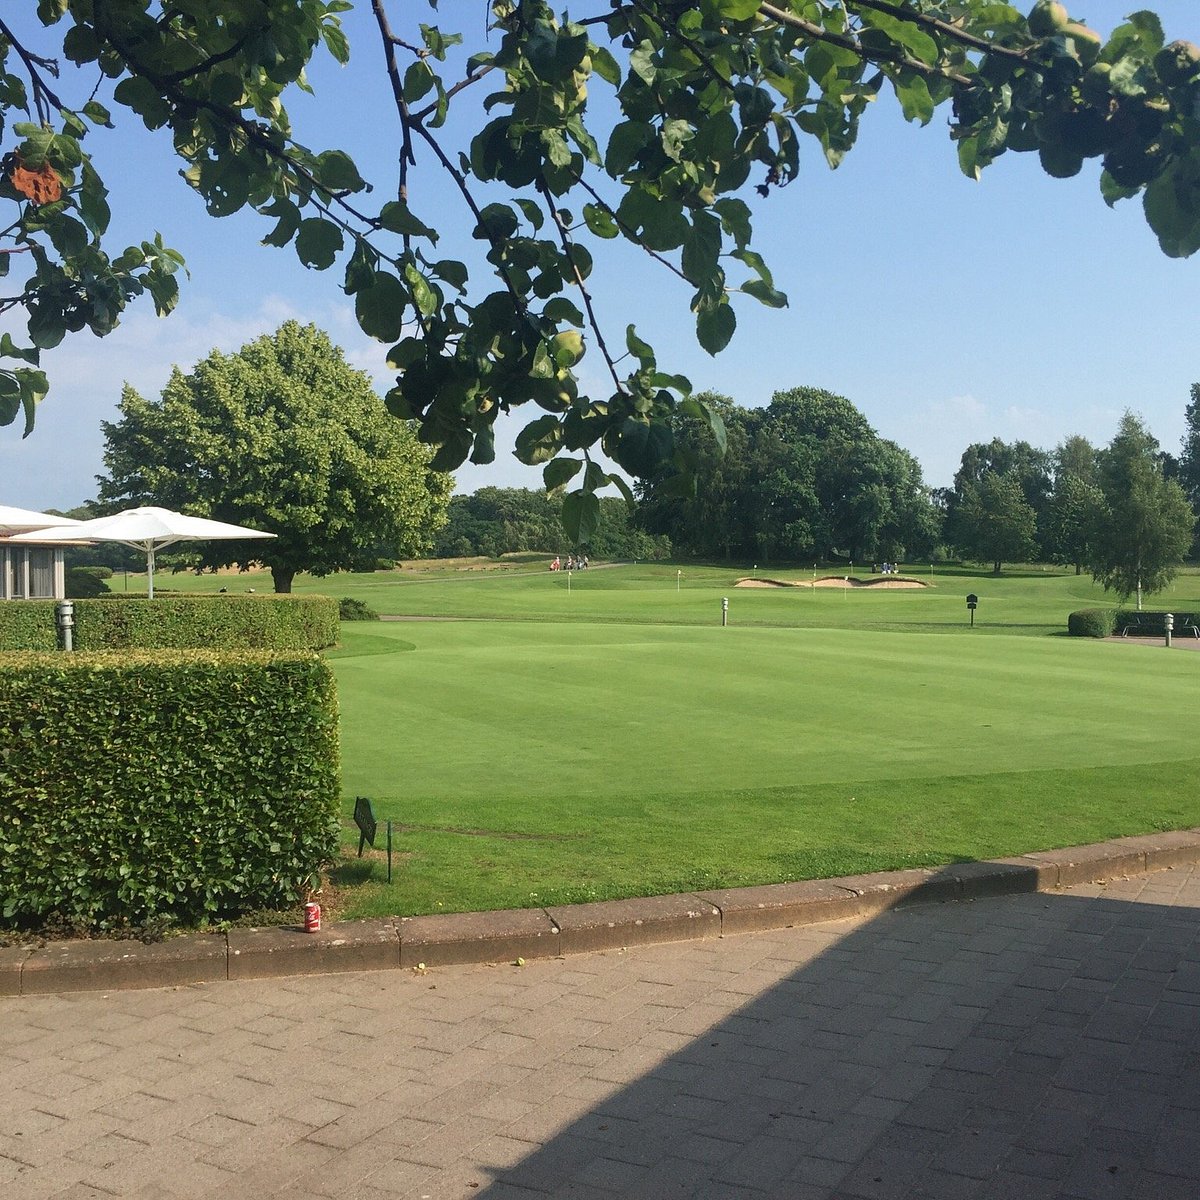 zoom sarkom Fakultet Vasatorps Golfbana (Helsingborg) - All You Need to Know BEFORE You Go